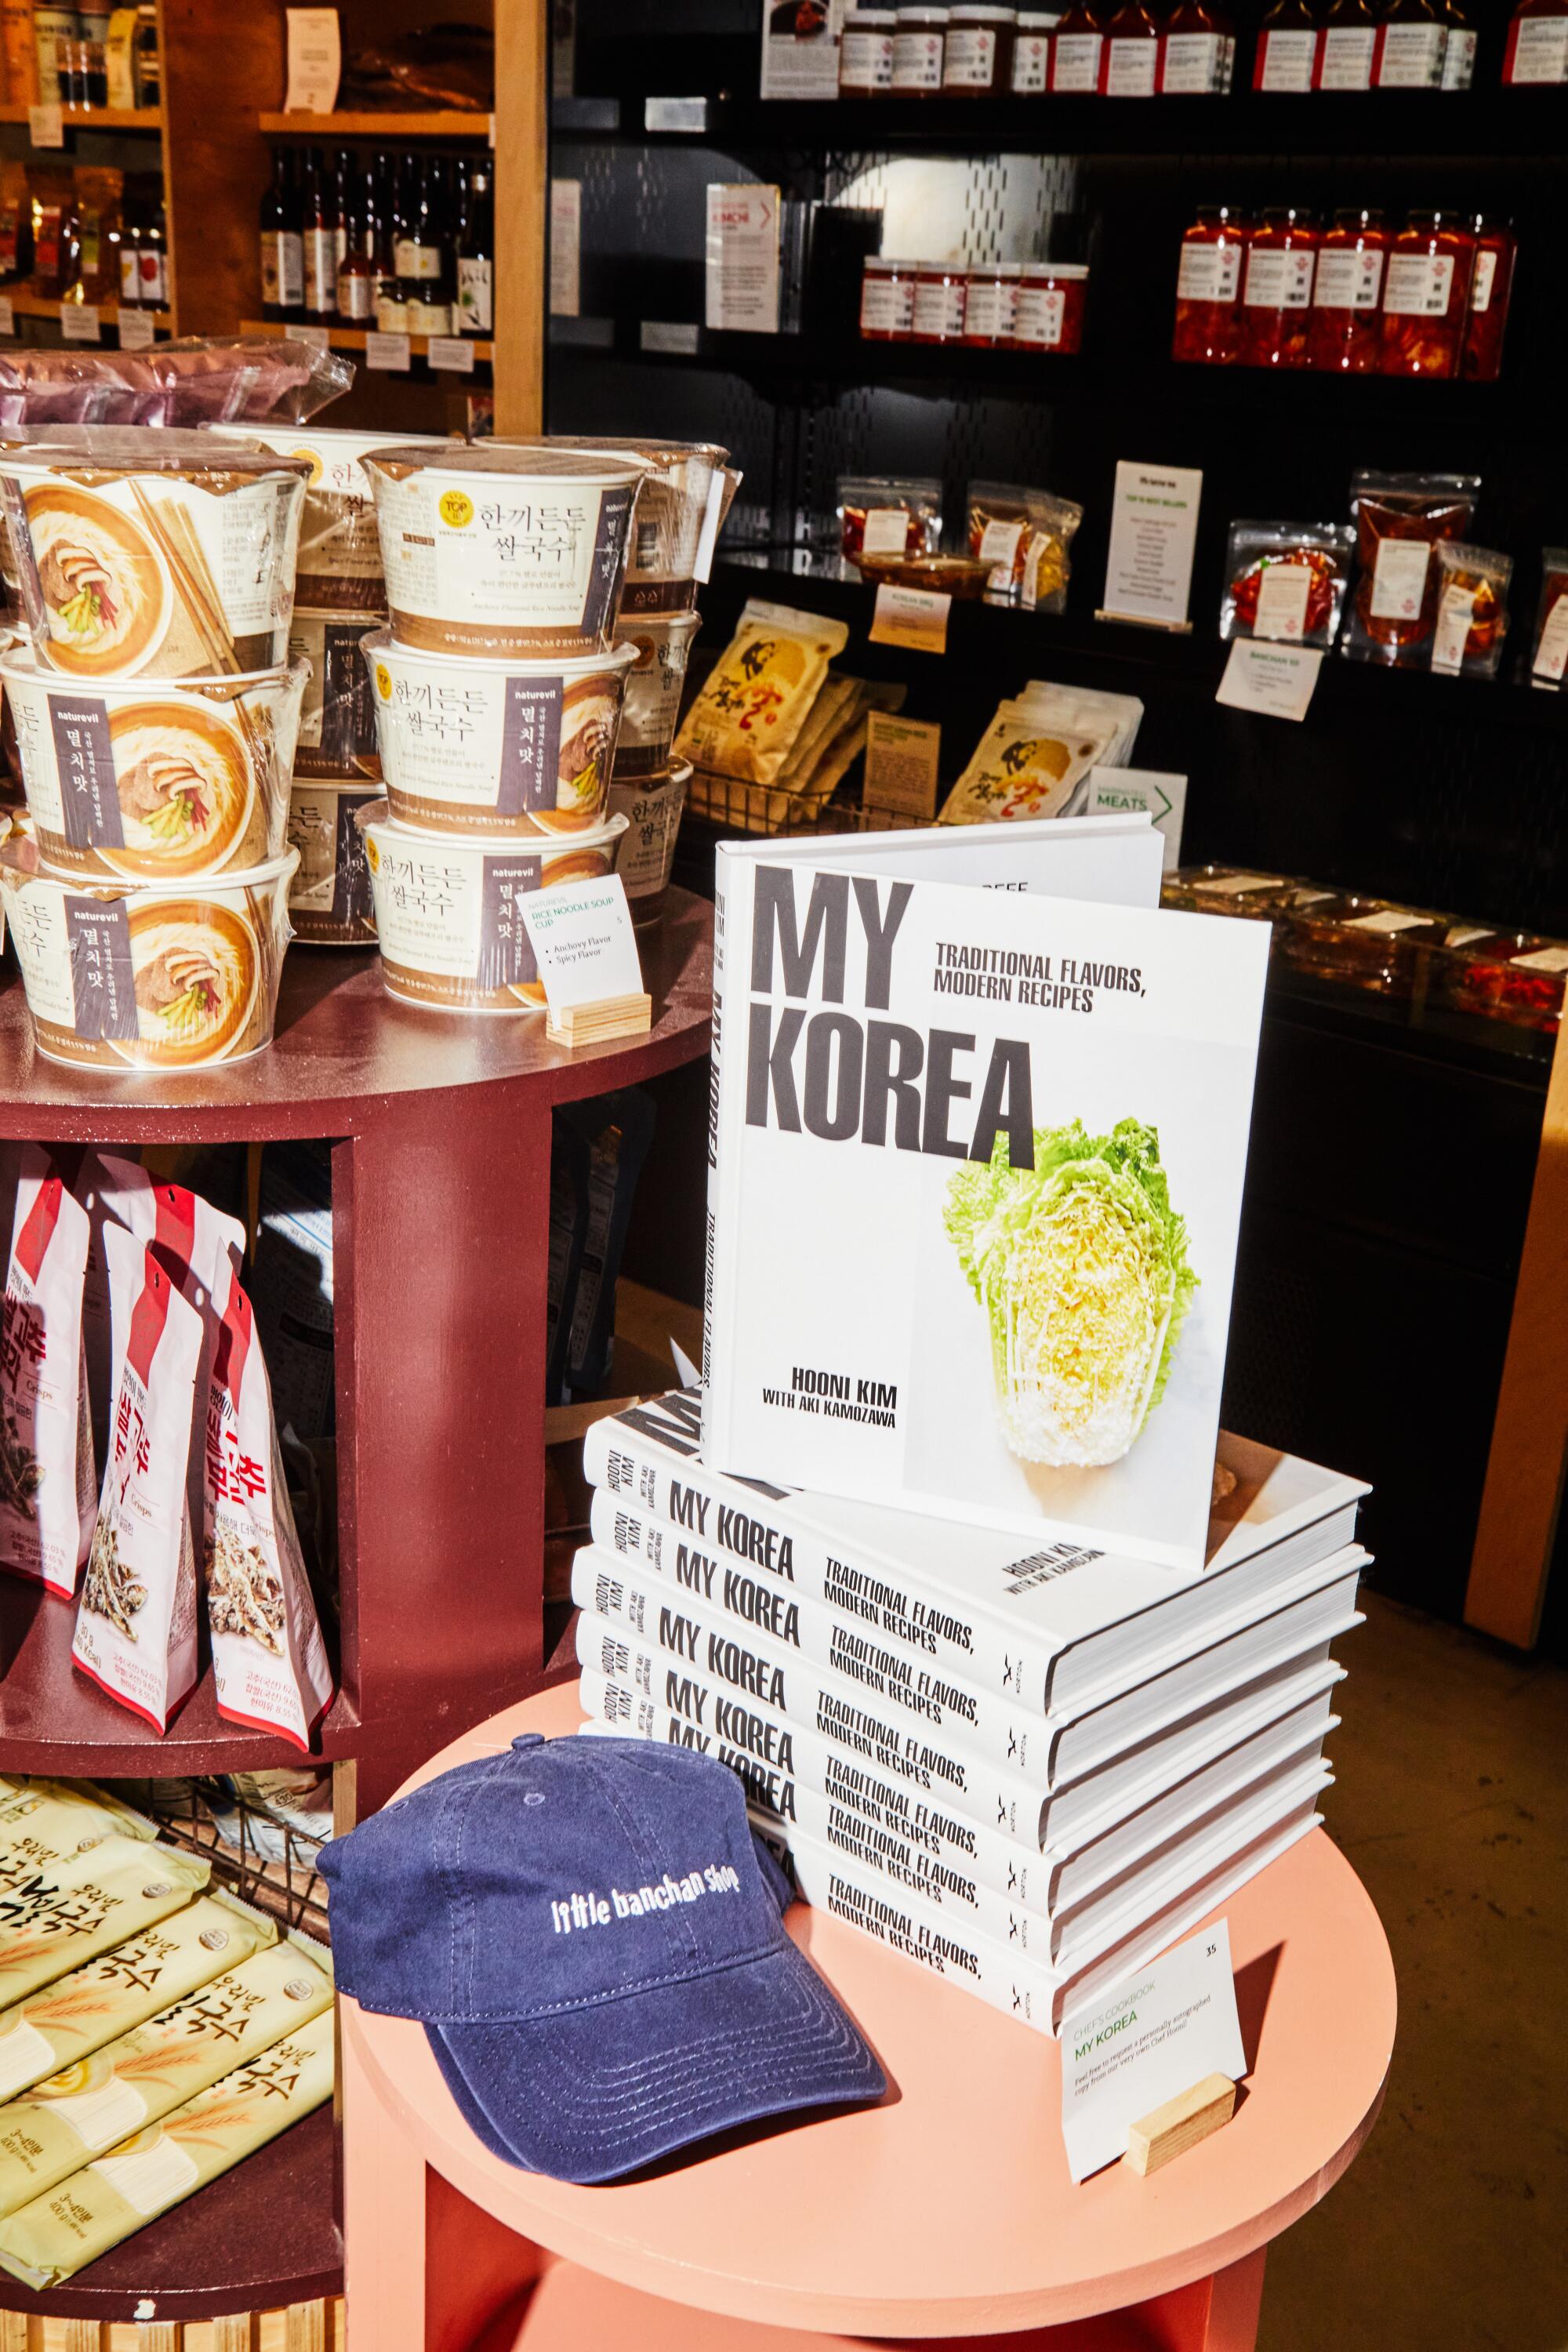 "My Korea," a book display at the Little Banchan Shop in Long Island City.